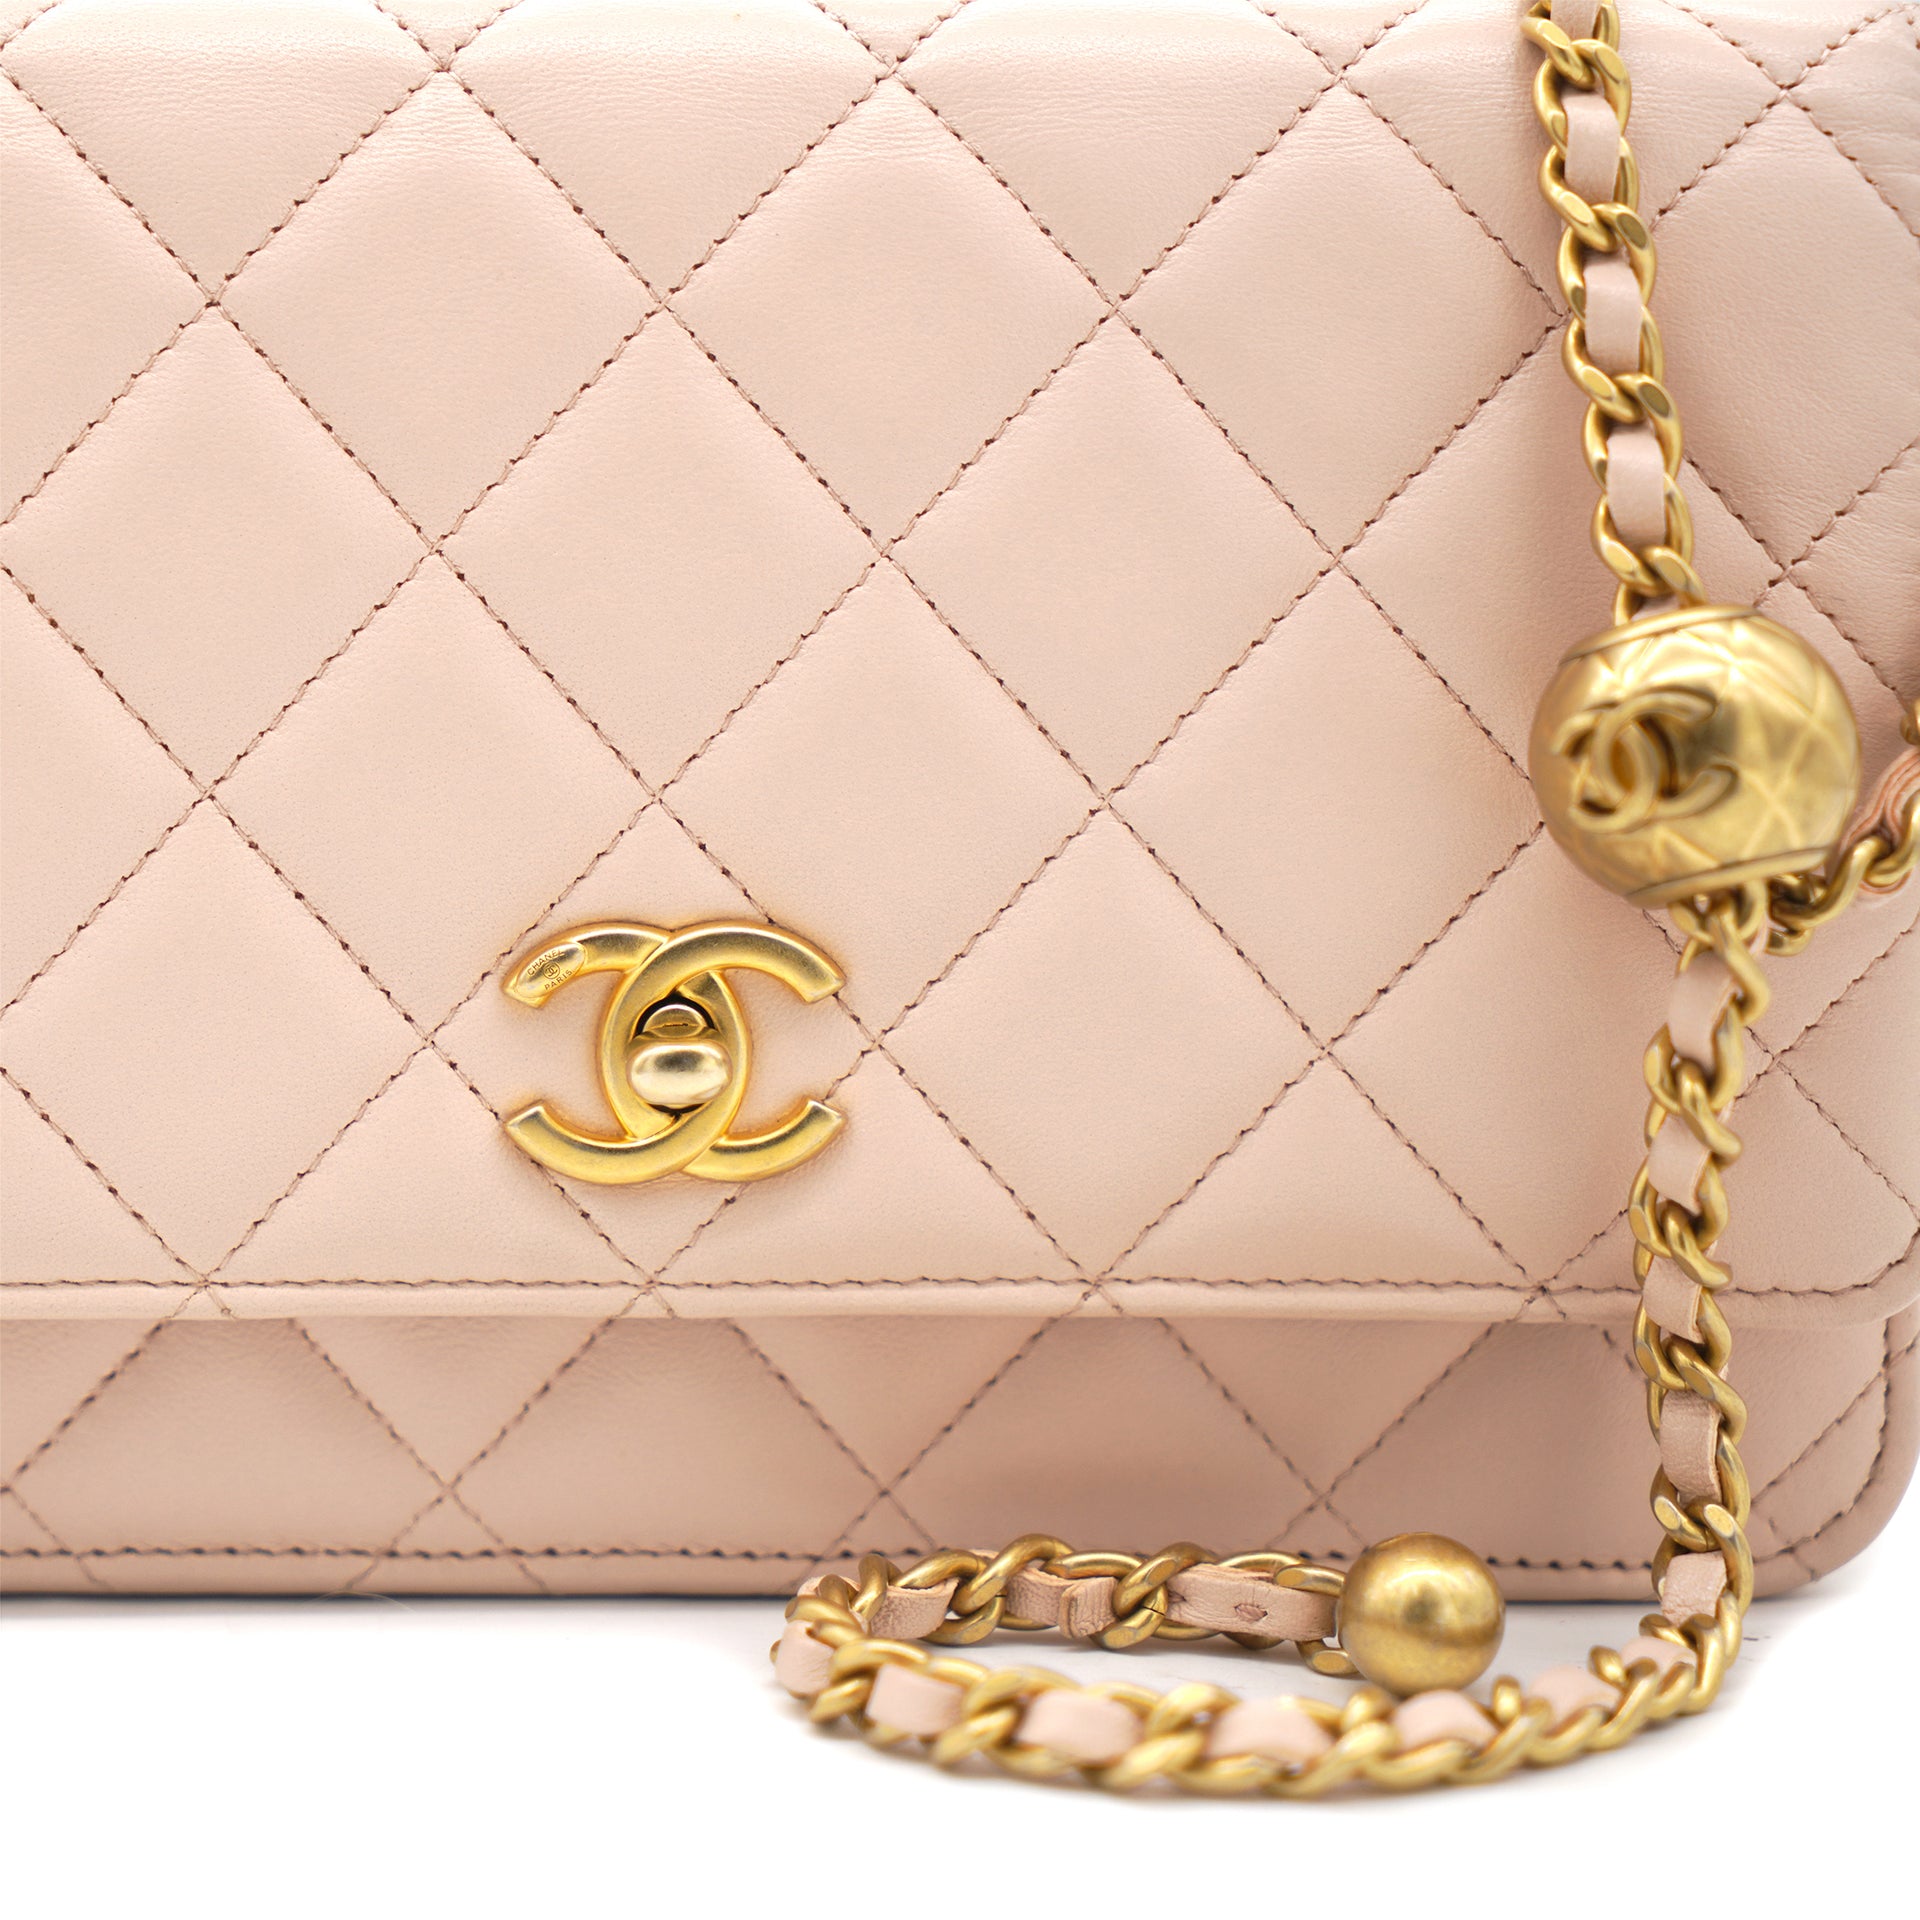 Chanel Pink Quilted Calfskin Gabrielle Wallet On Chain (WOC